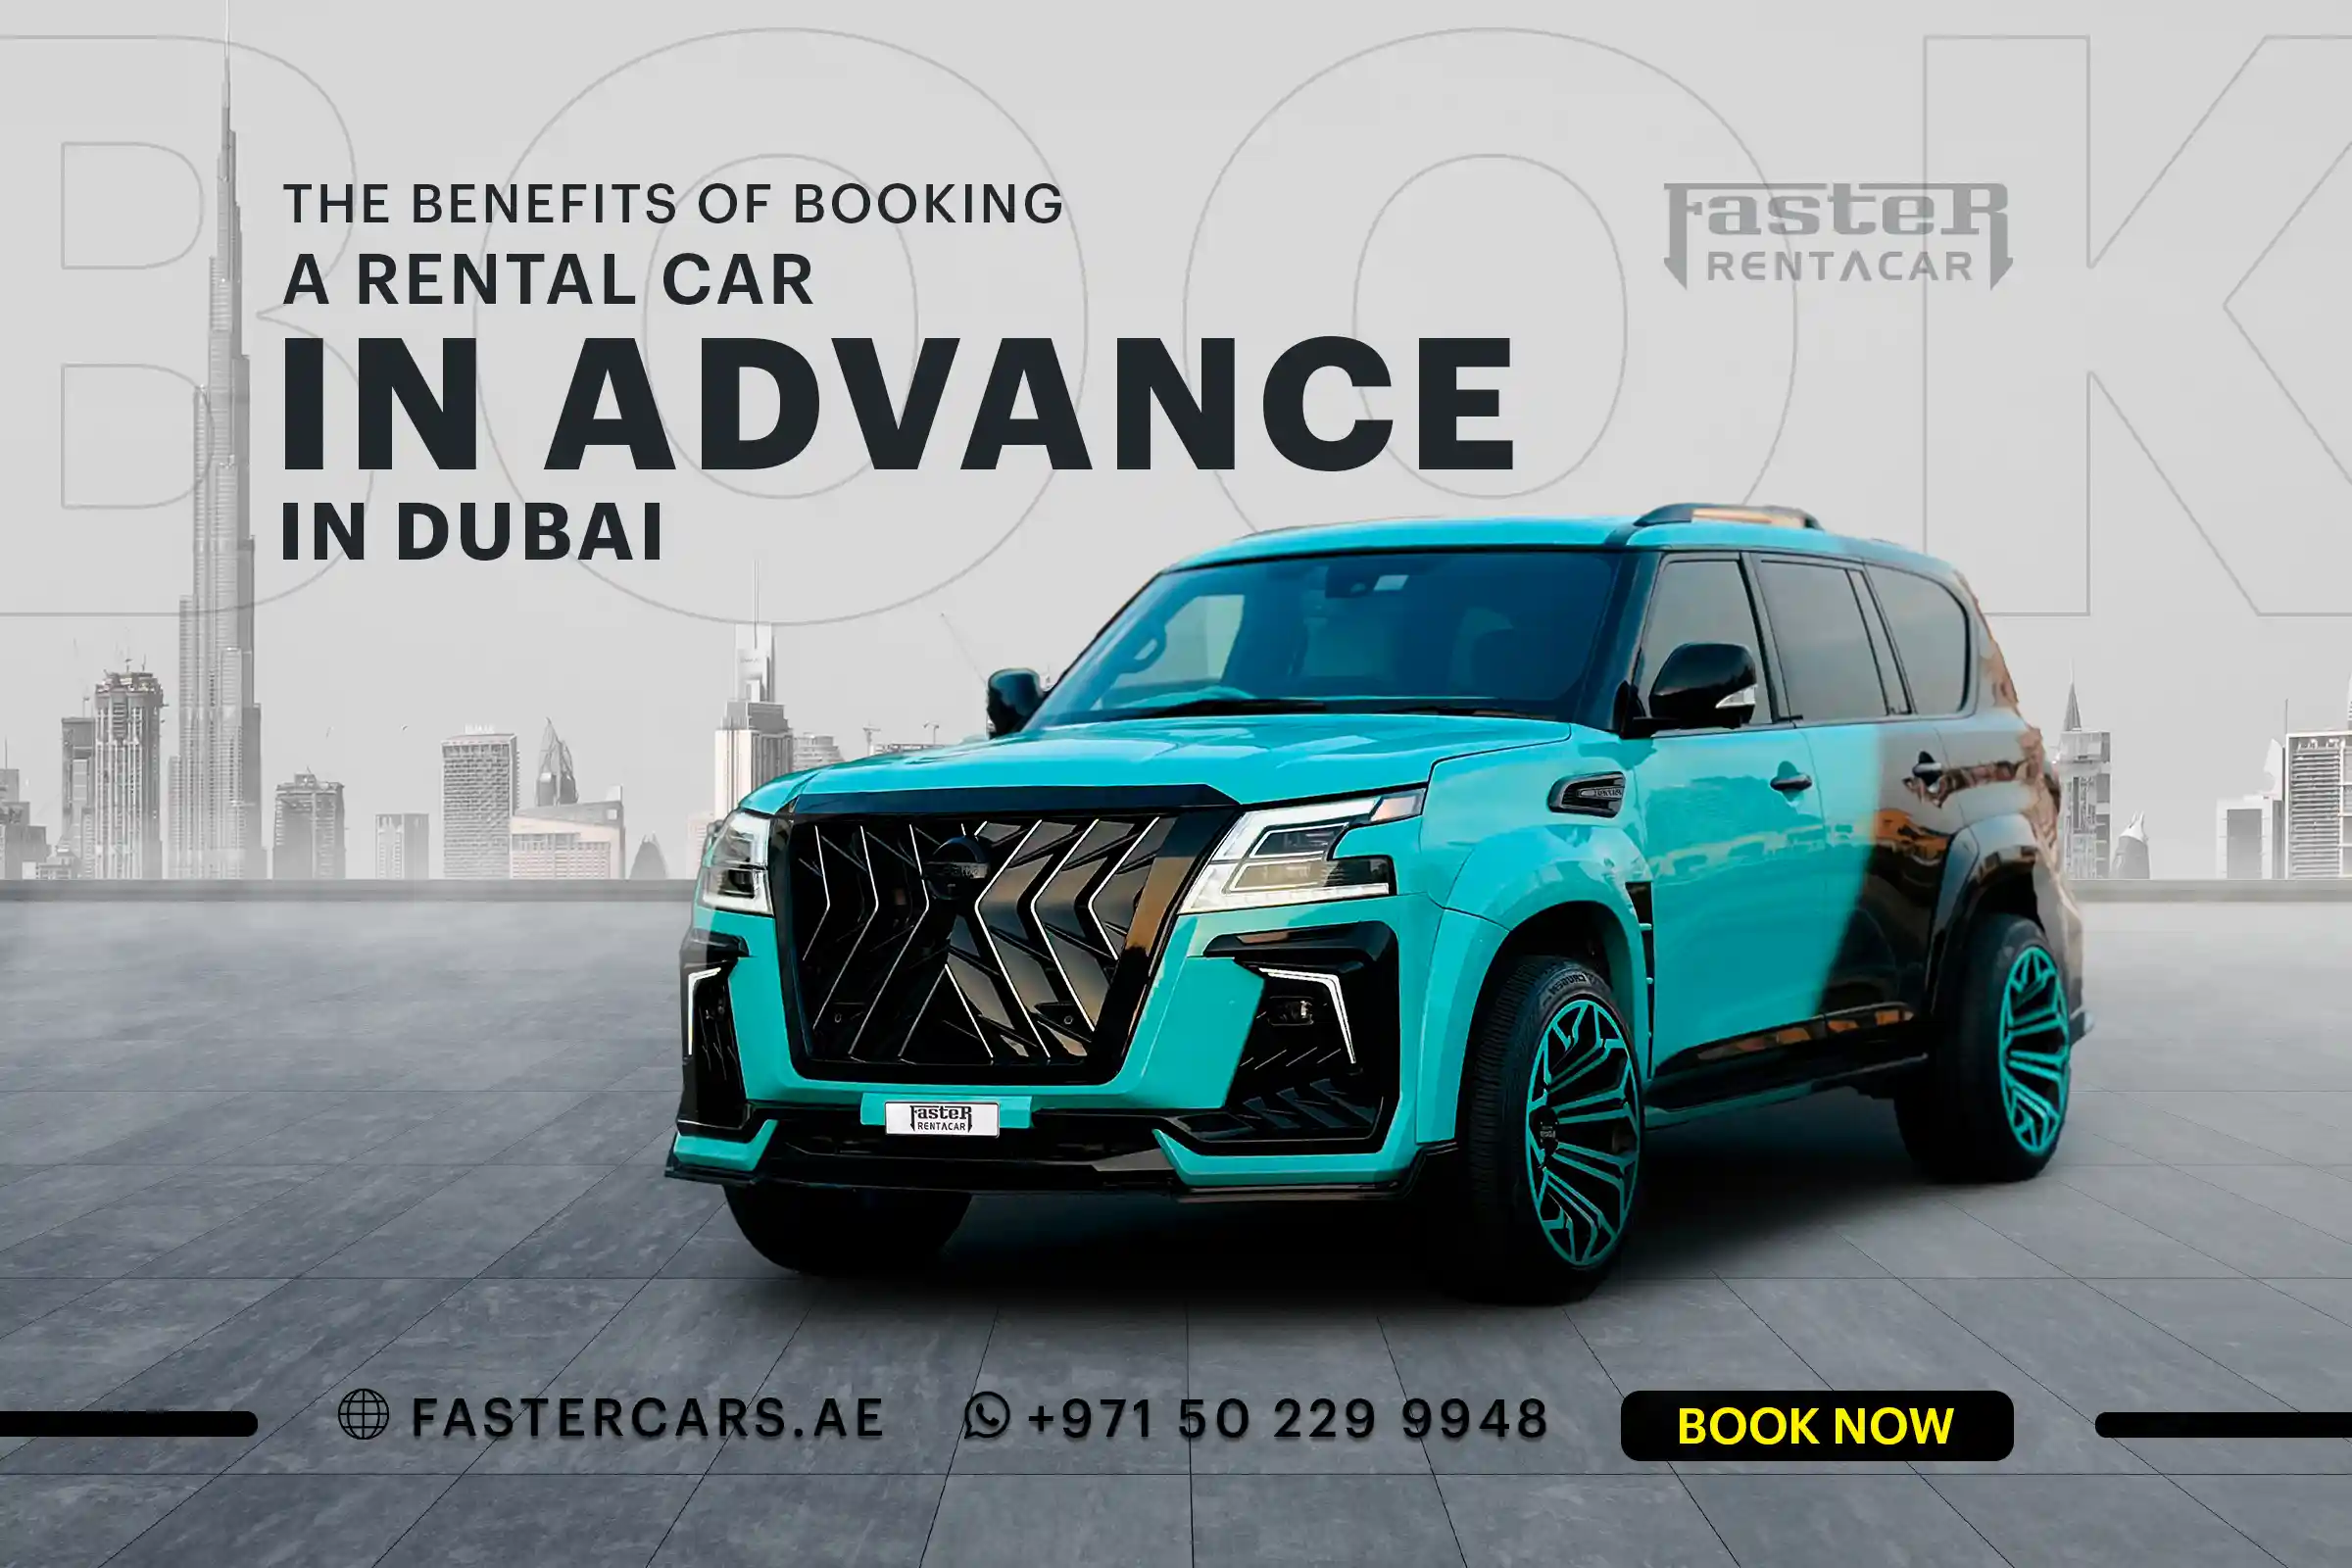 The Benefits of Booking a Rental Car in Advance in Dubai